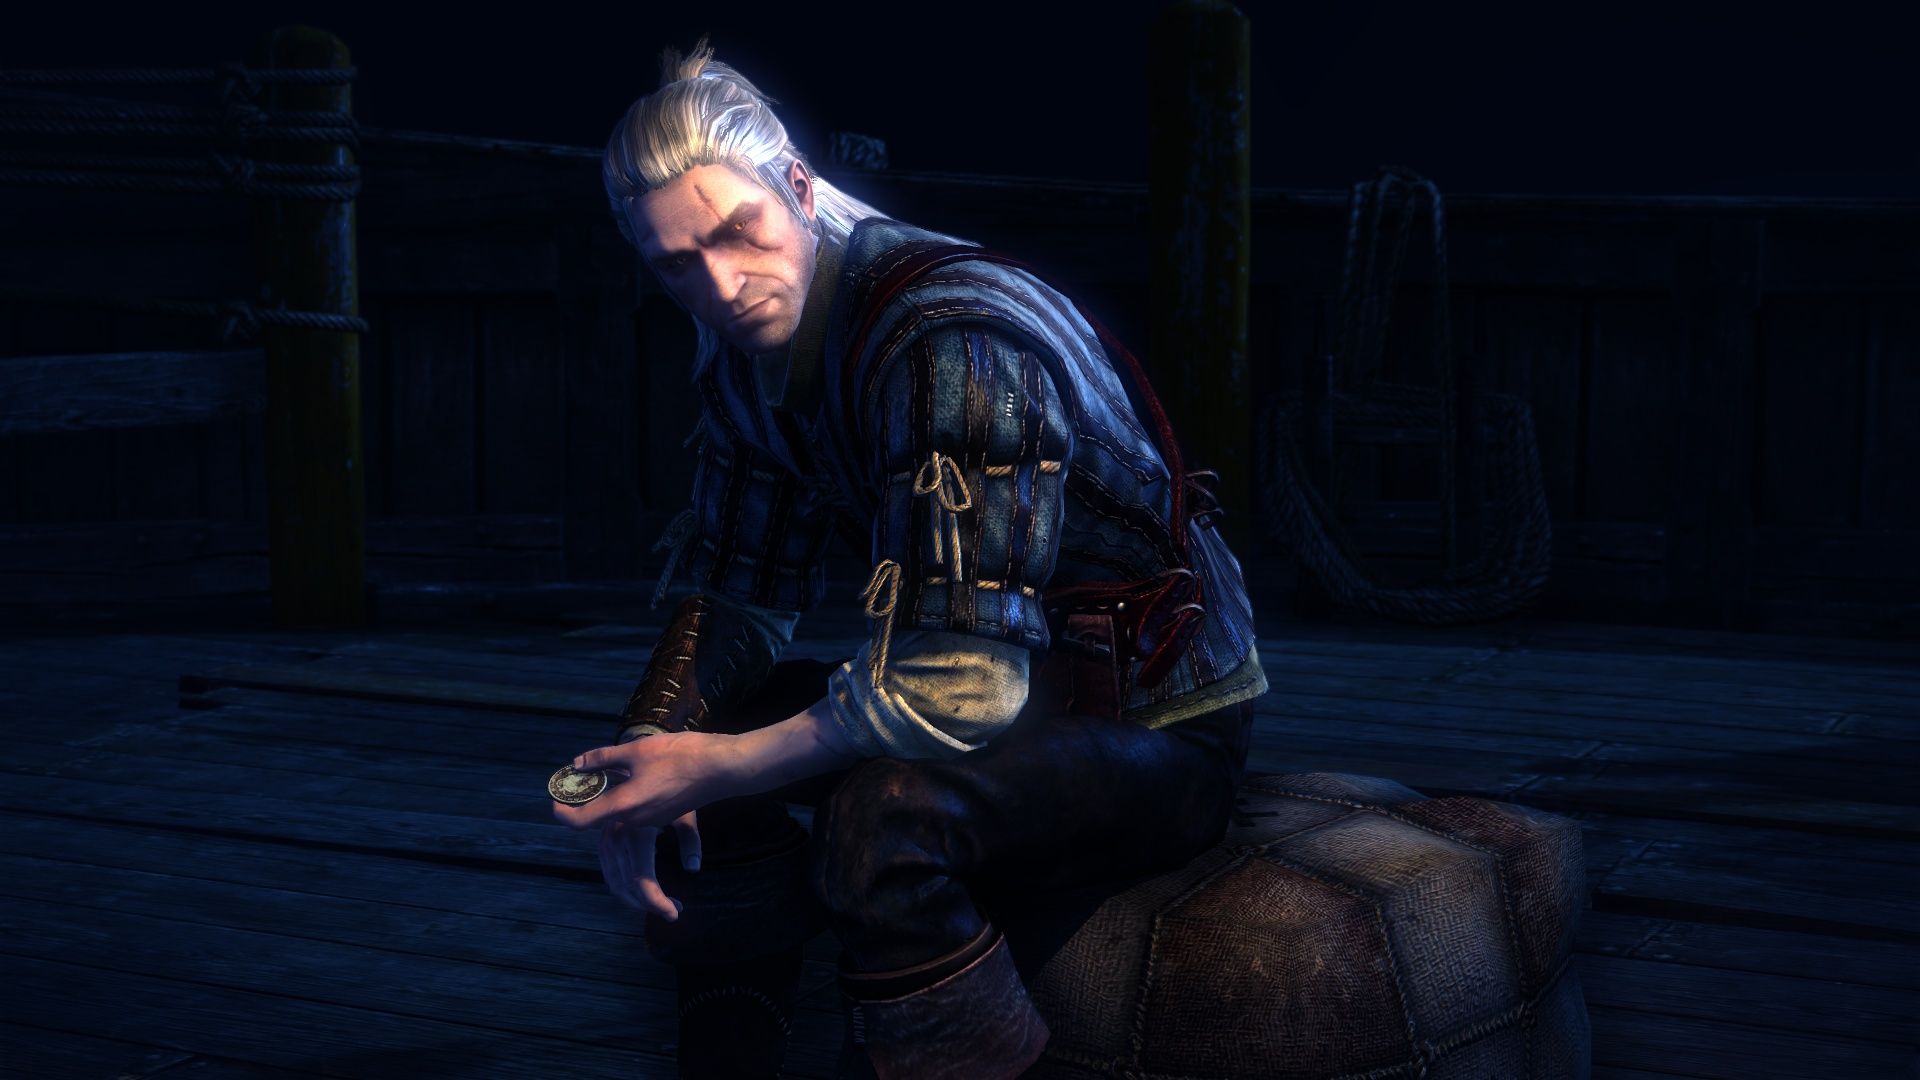 The Witcher 2: Assassins of Kings PC Gaming